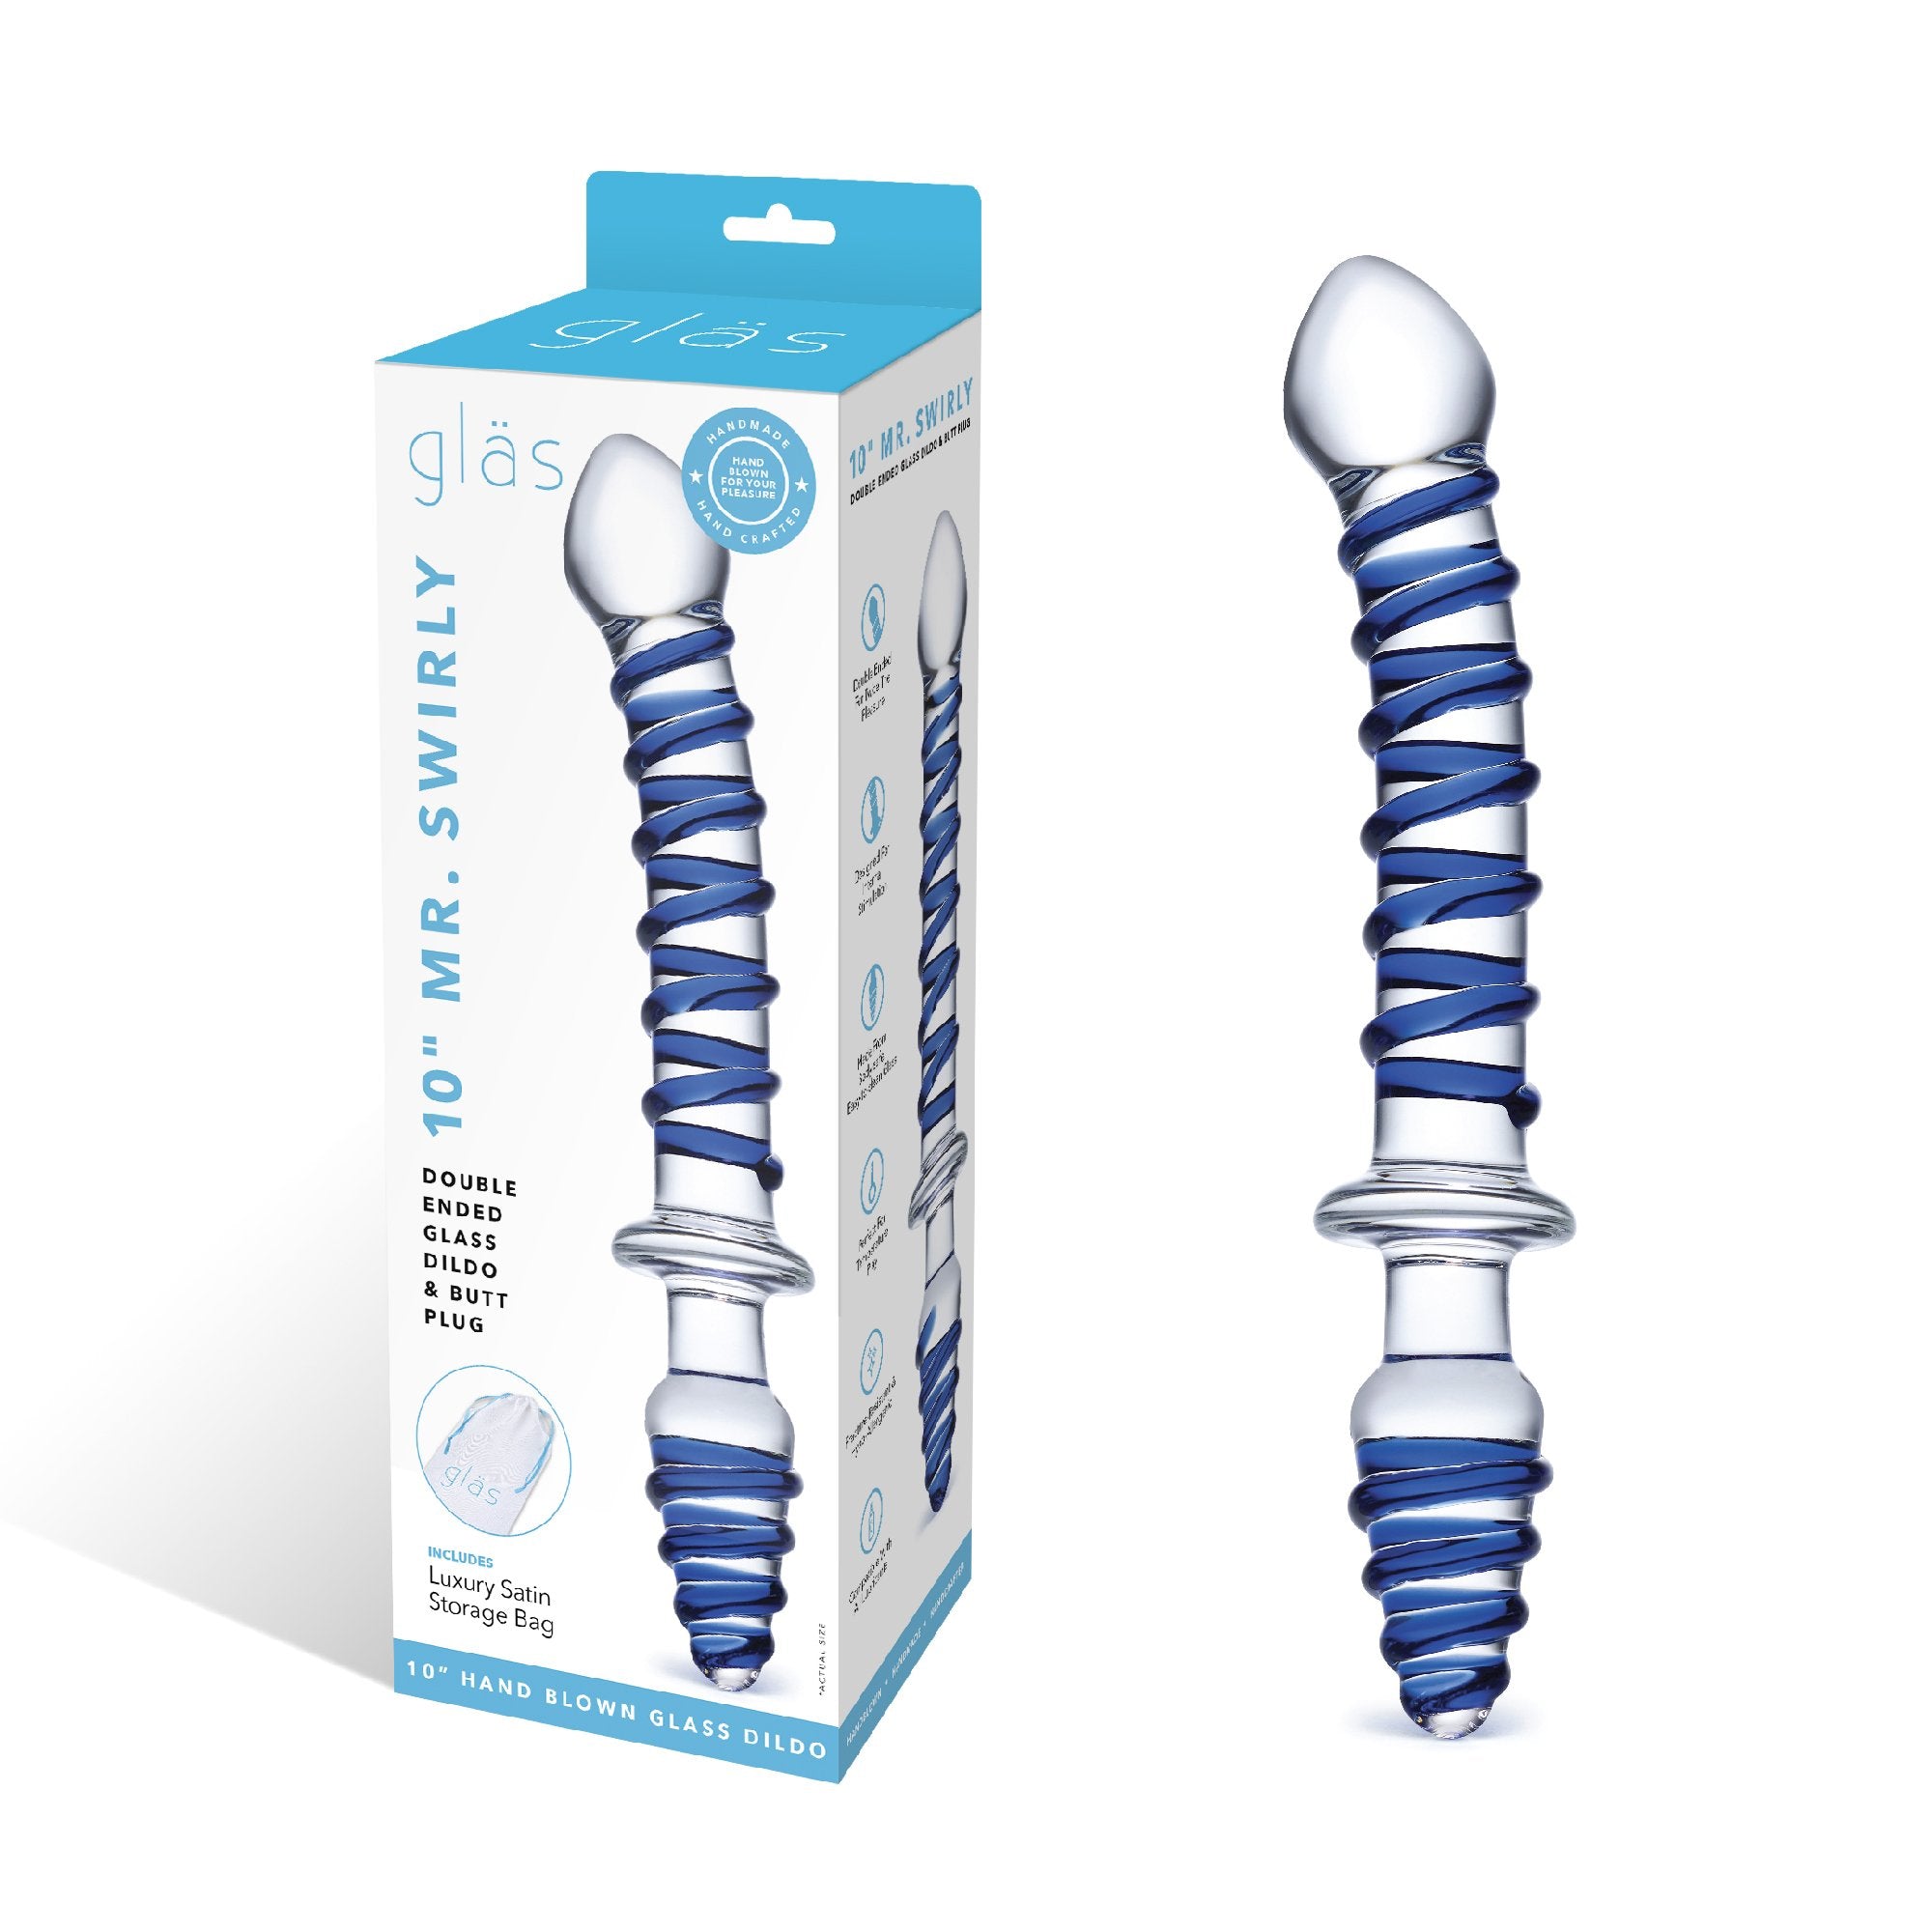 Packaging of the Gläs 10 inch Mr. Swirly Double Ended Glass Dildo and Butt Plug